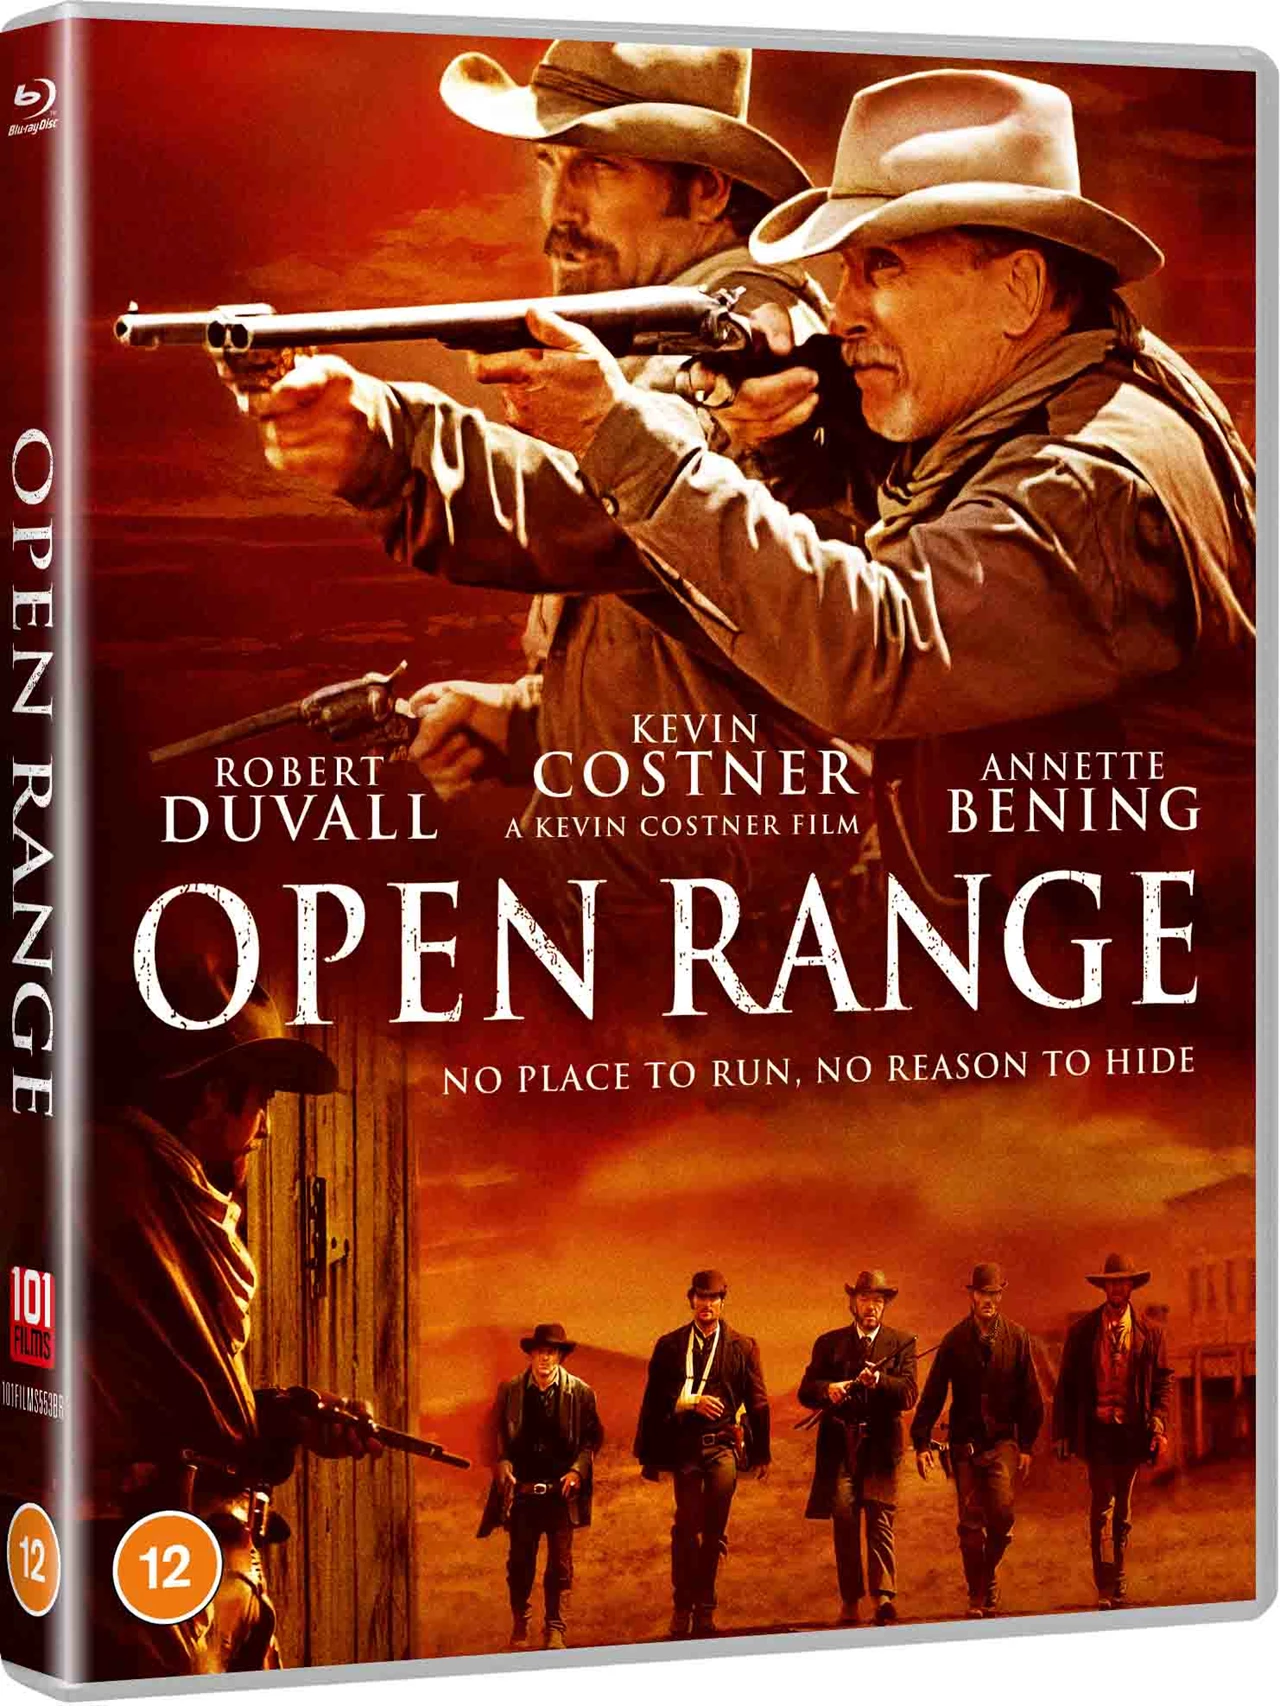 Open Range (2003) - August 9th, 2021, From 101 Films. - Blu-ray Forum